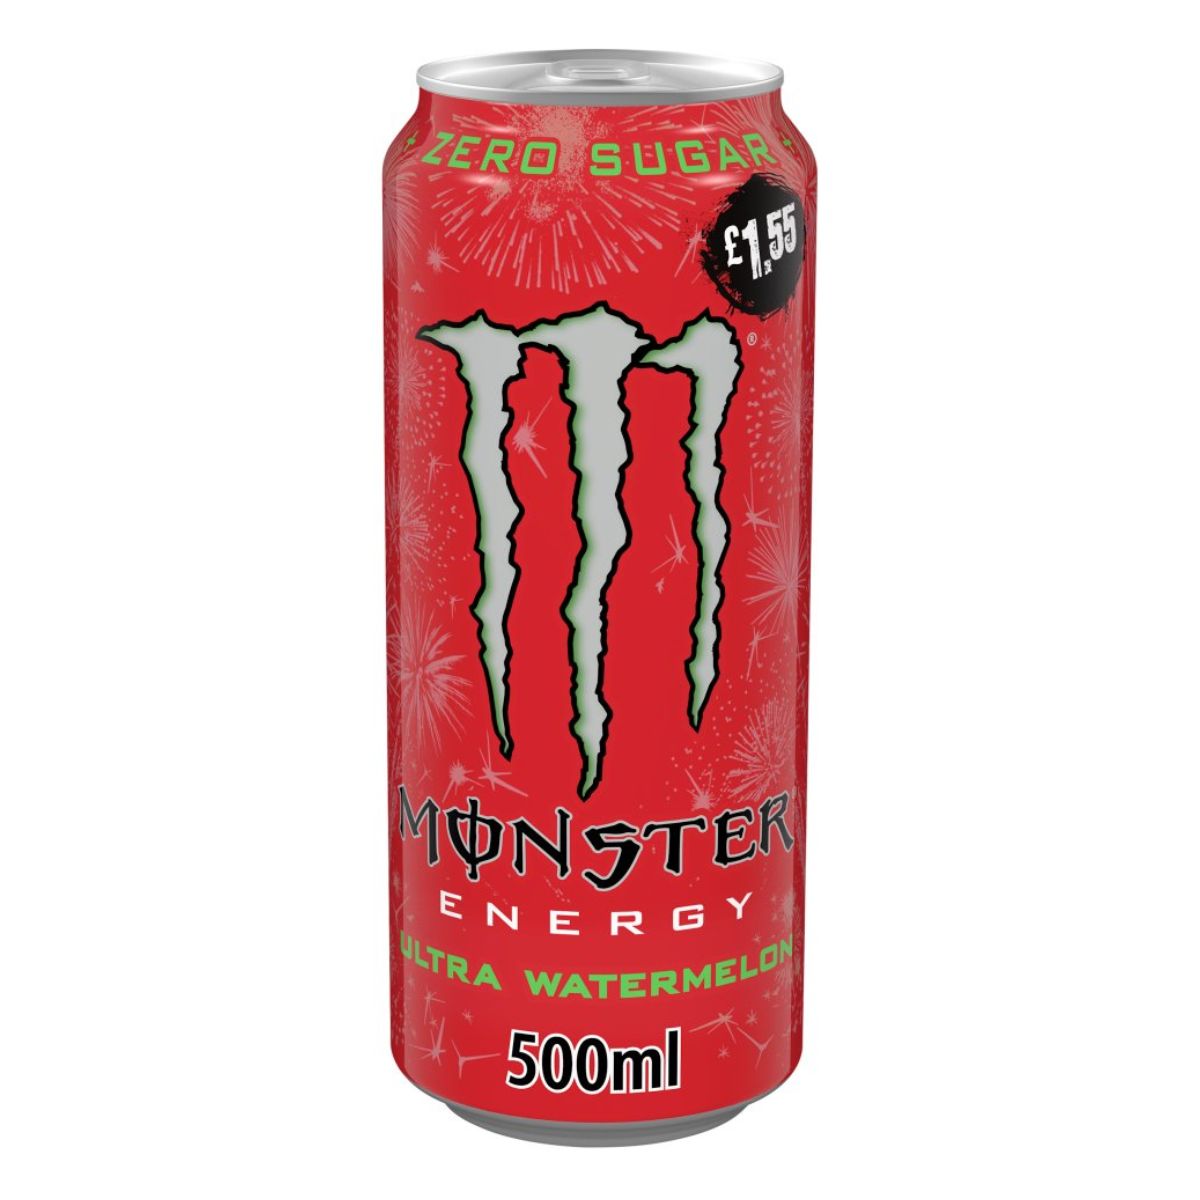 A can of Monster Ultra Watermelon energy on a white background.